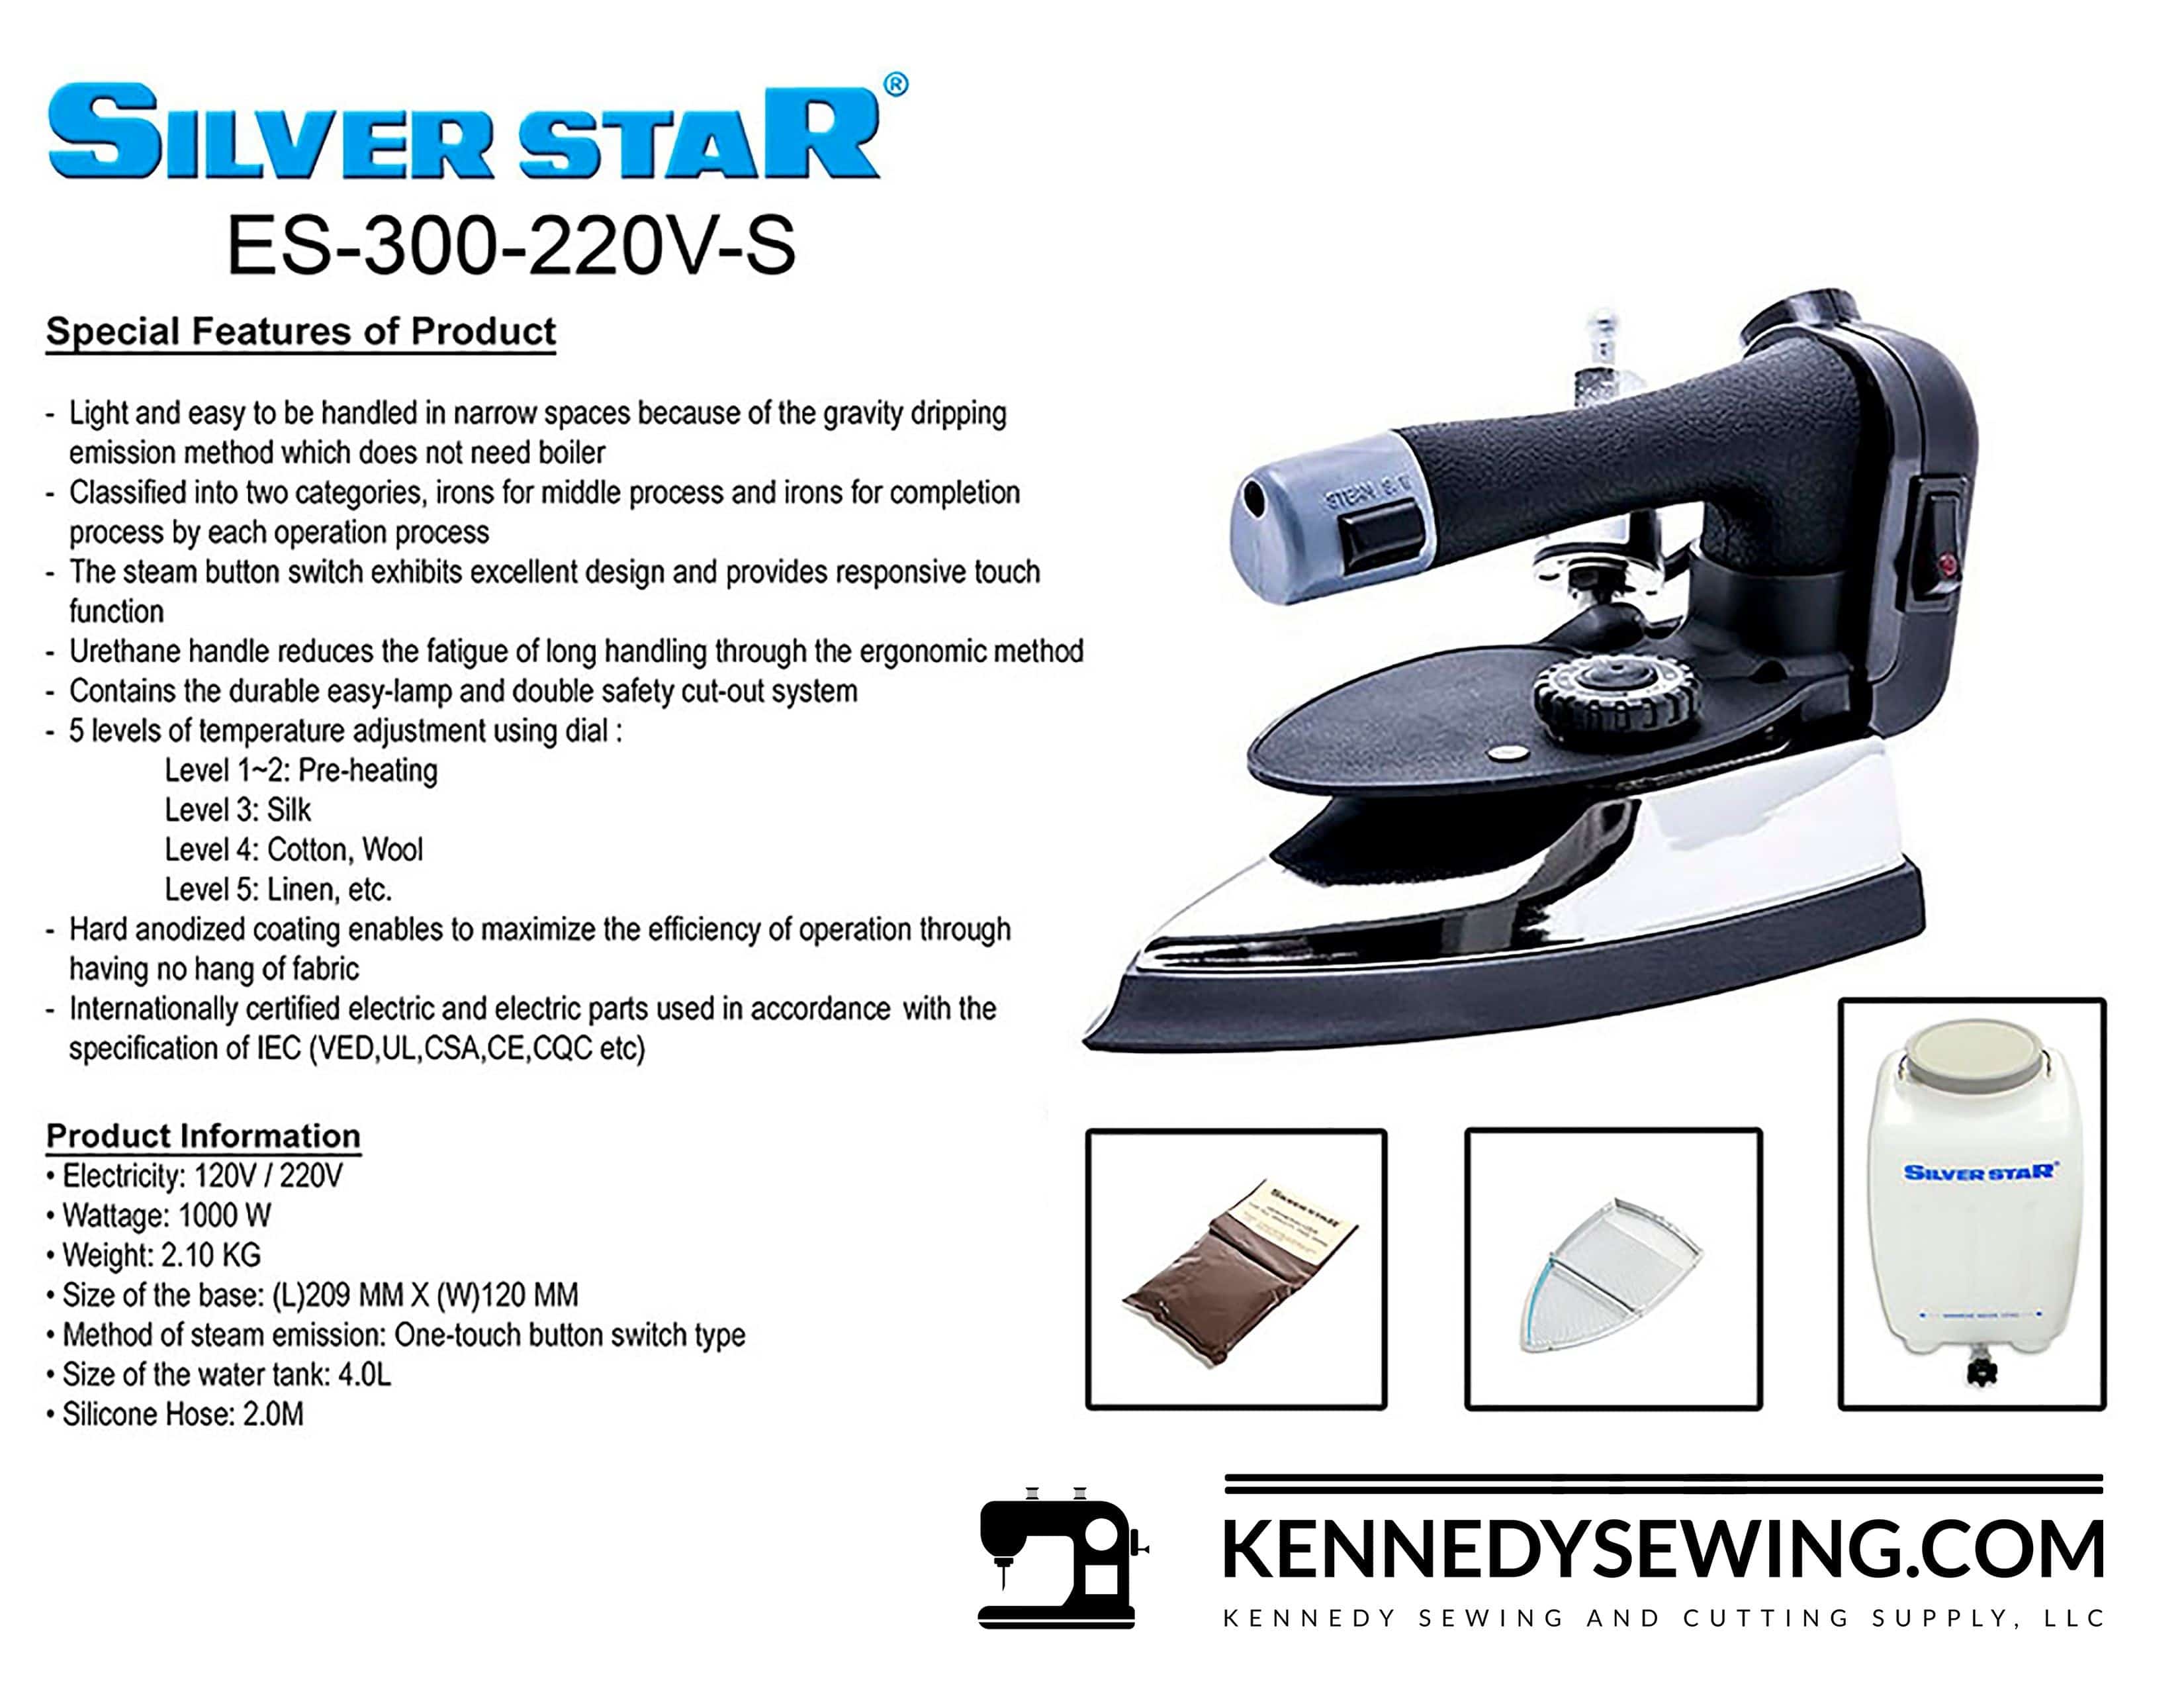 SILVER STAR 
Model: ES-300-110V-S 
IRON WITH GRAVITY DRIP
PRESSING and FINISHING EQUIPMENT
110 VOLTS